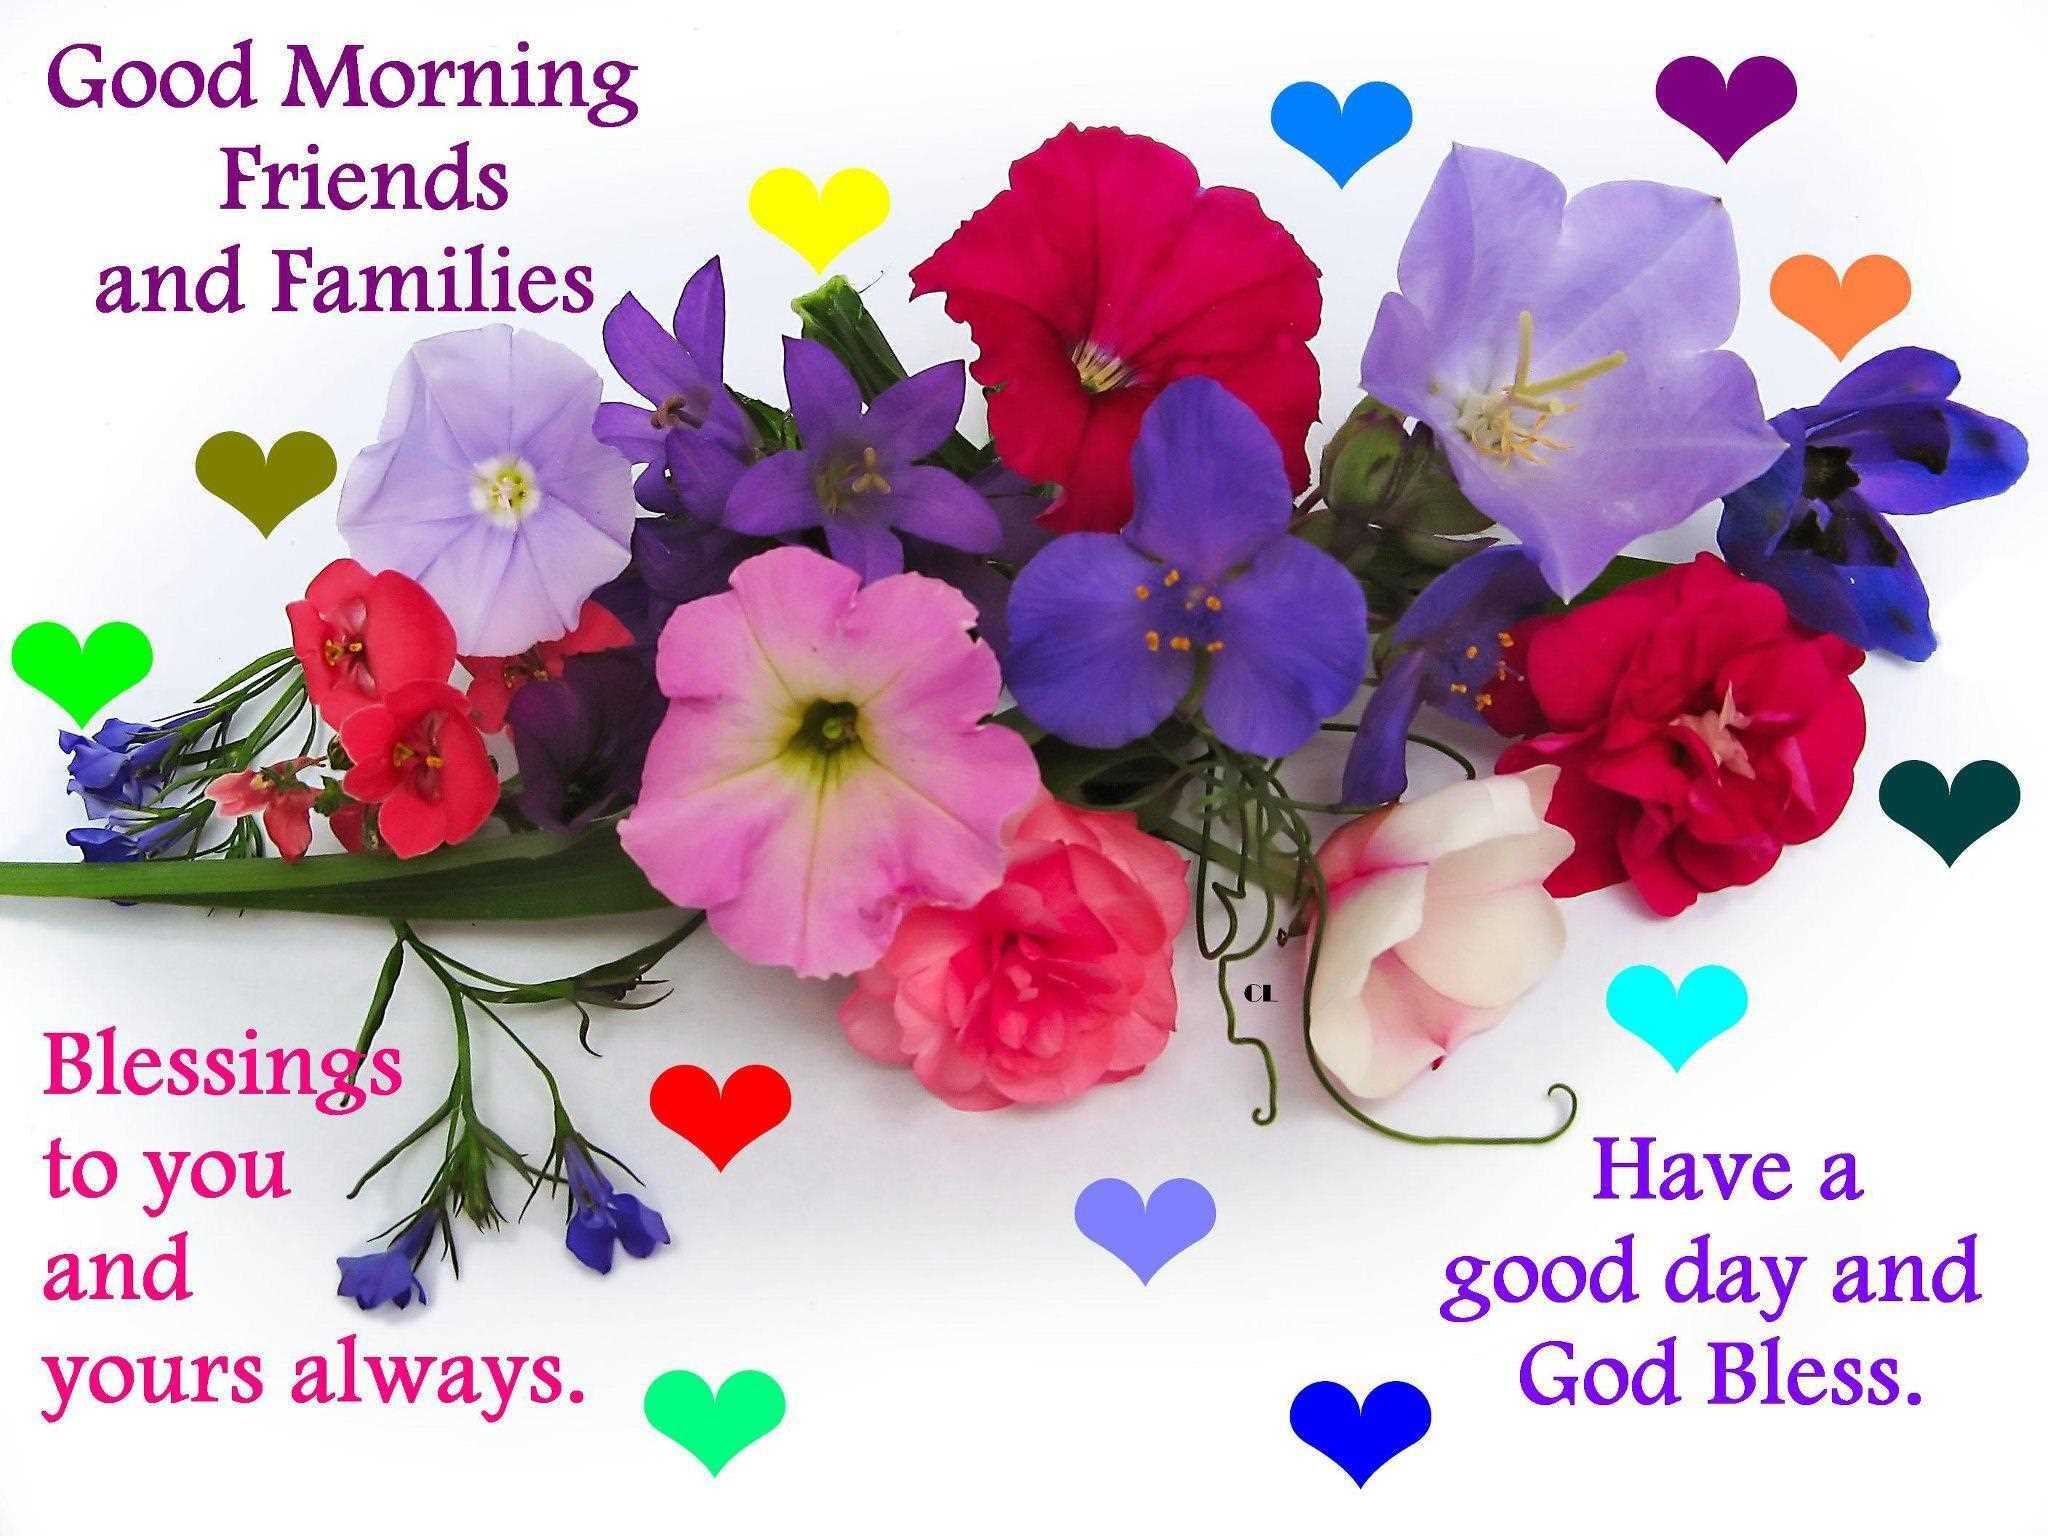 Good Morning Friends And Family - Good Morning Wishes Wallpaper Free Download - HD Wallpaper 